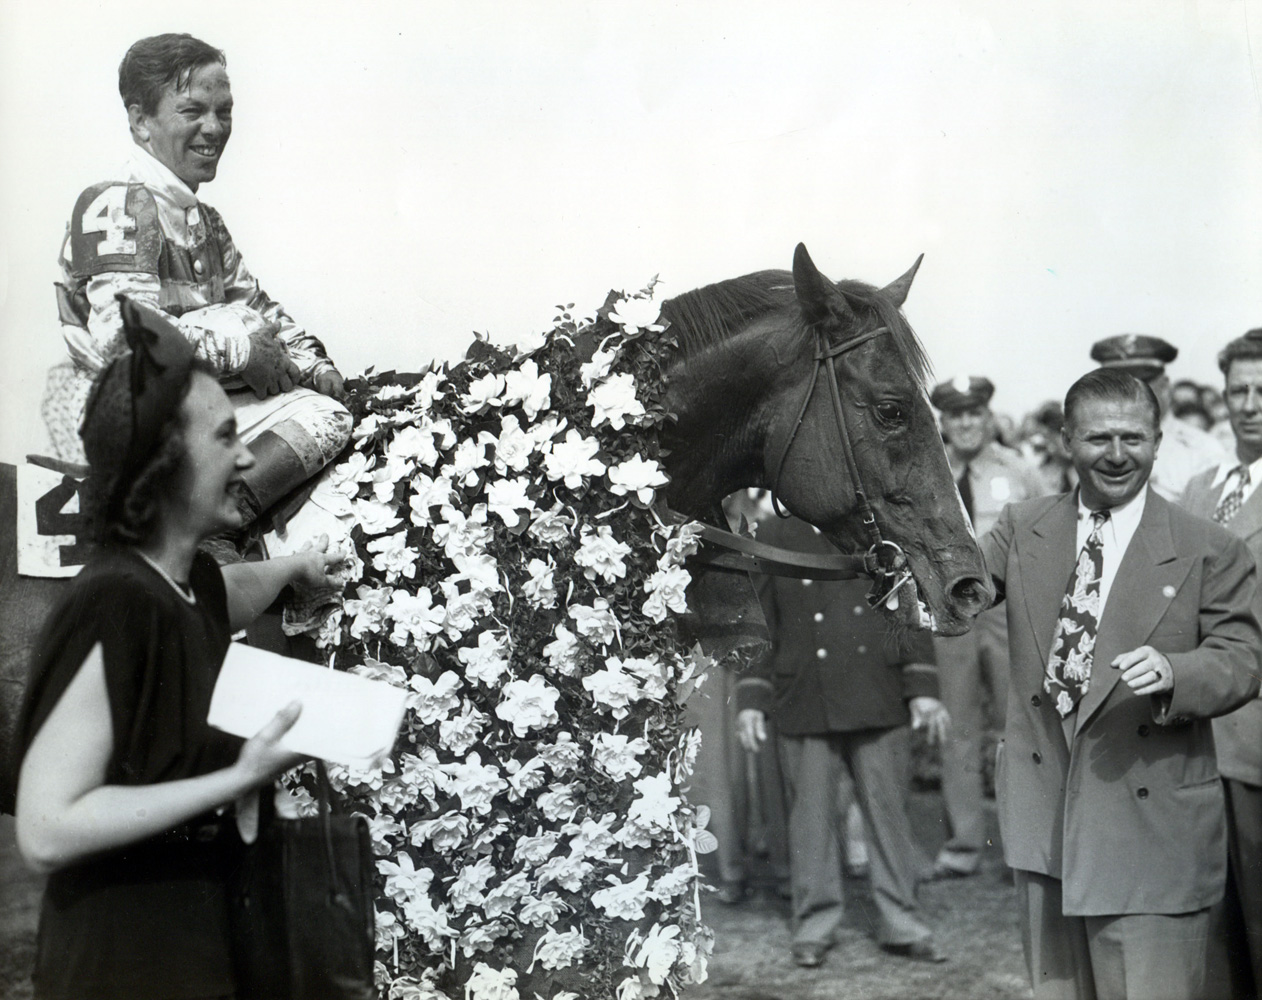 Stymie (Conn McCreary up) with owner Ethel D. Jacobs and trainer Hirsch Jacobs after winning the 1947 Empire City Gold Cup at Belmont (Museum Collection)